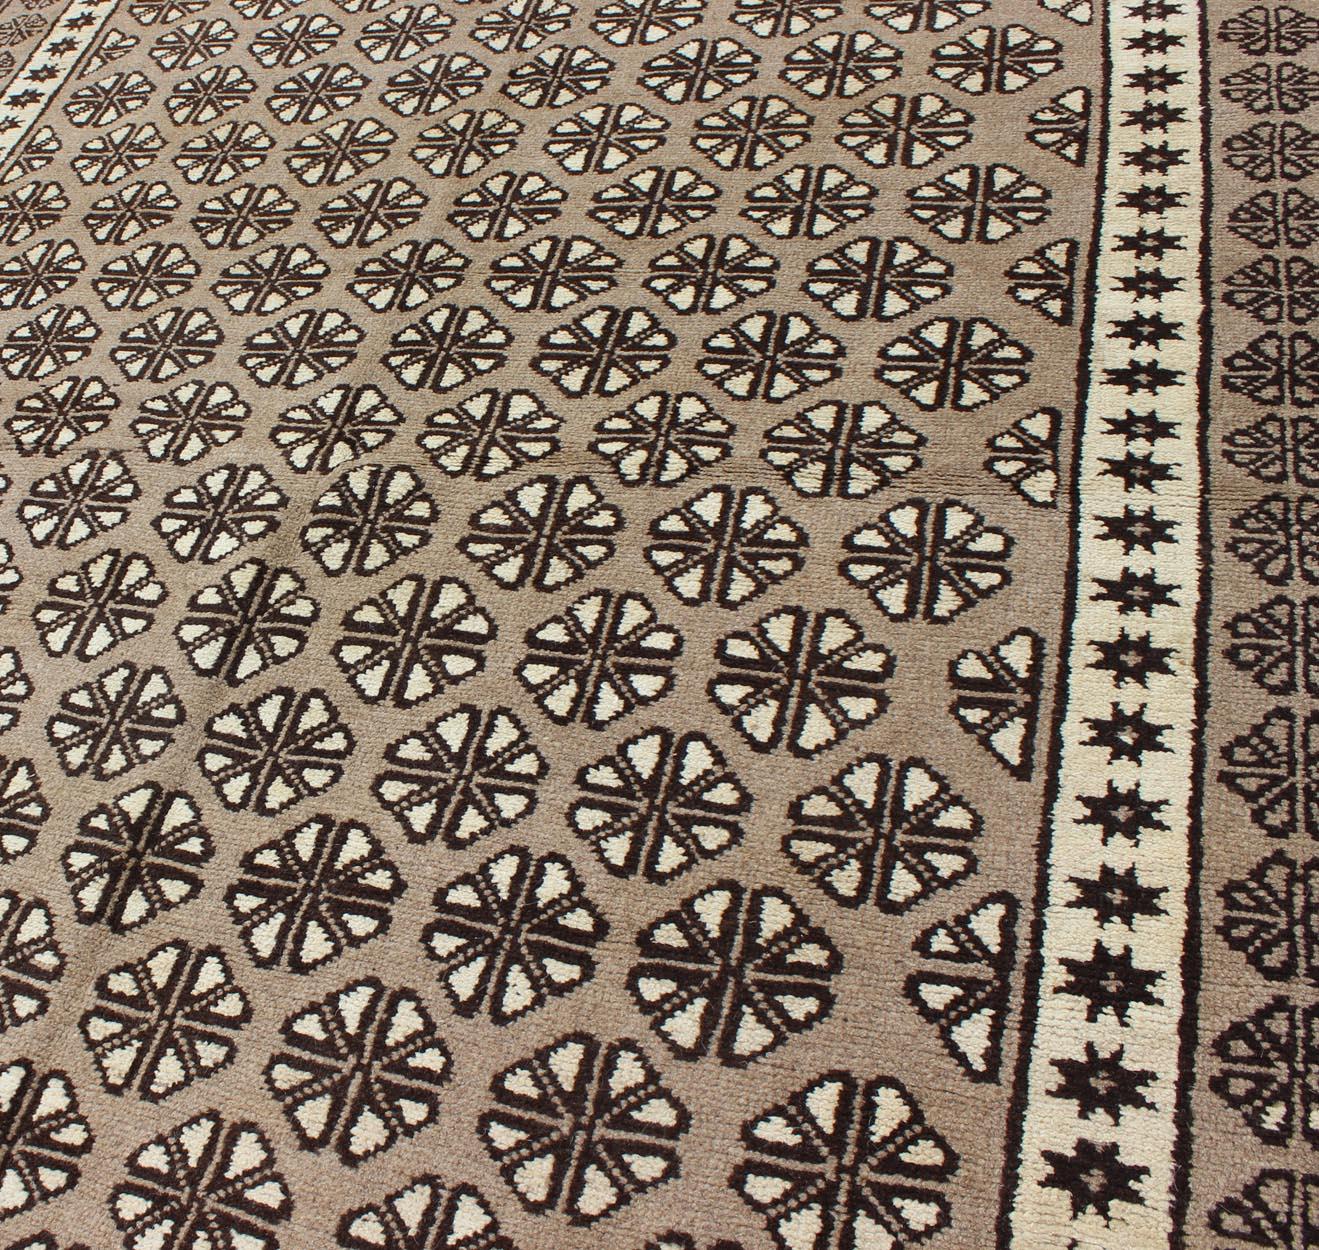 Vintage Persian Mishan Rug with All-Over Diamond Design in Gray, Brown and Cream In Good Condition For Sale In Atlanta, GA